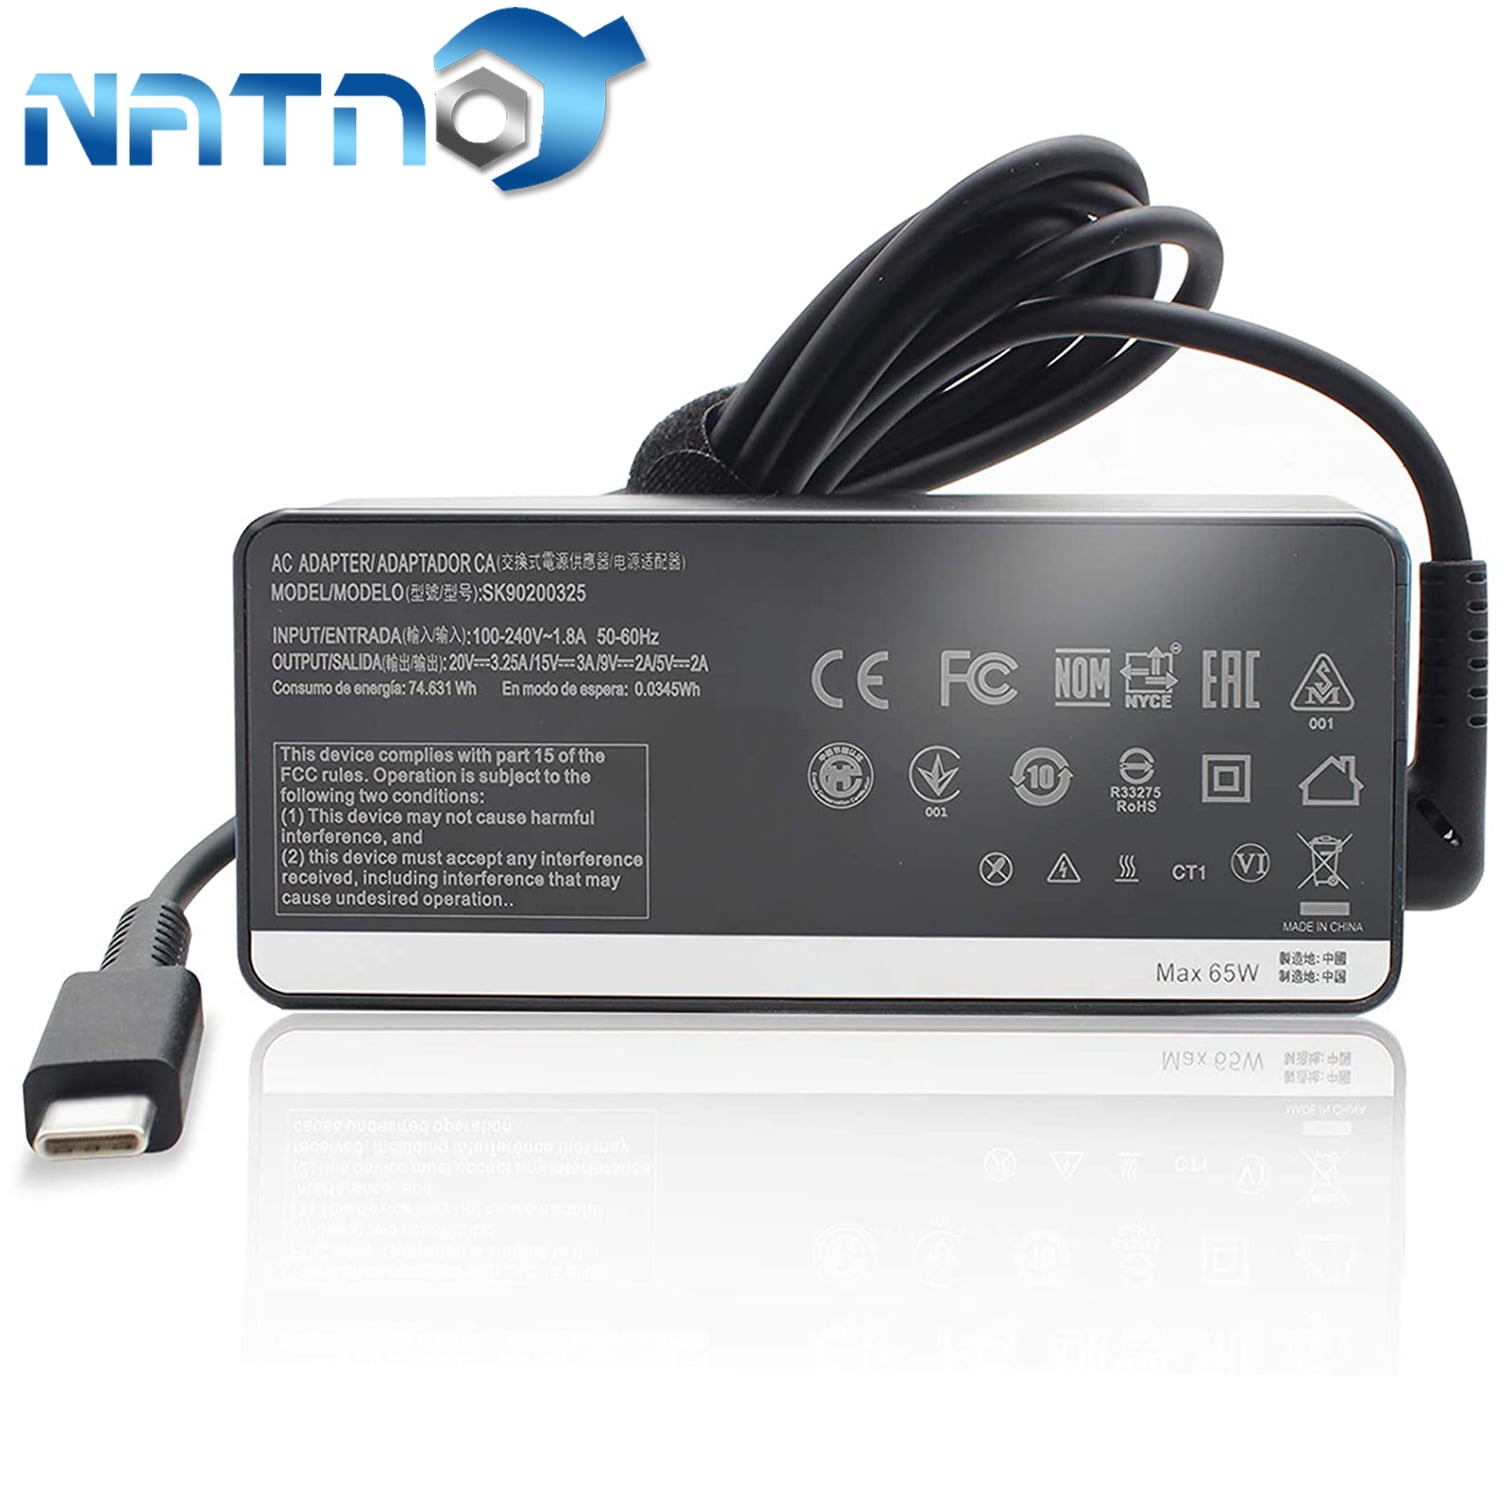 USB C Laptop Charger 65W 45W for Lenovo Chromebook 100e 300e 500e C330 S330  ThinkPad T480 T480s T580 T580s E480 E580 Yoga A485 T490S T590 C930 C940 13  IdeaPad 730s AC Adapter